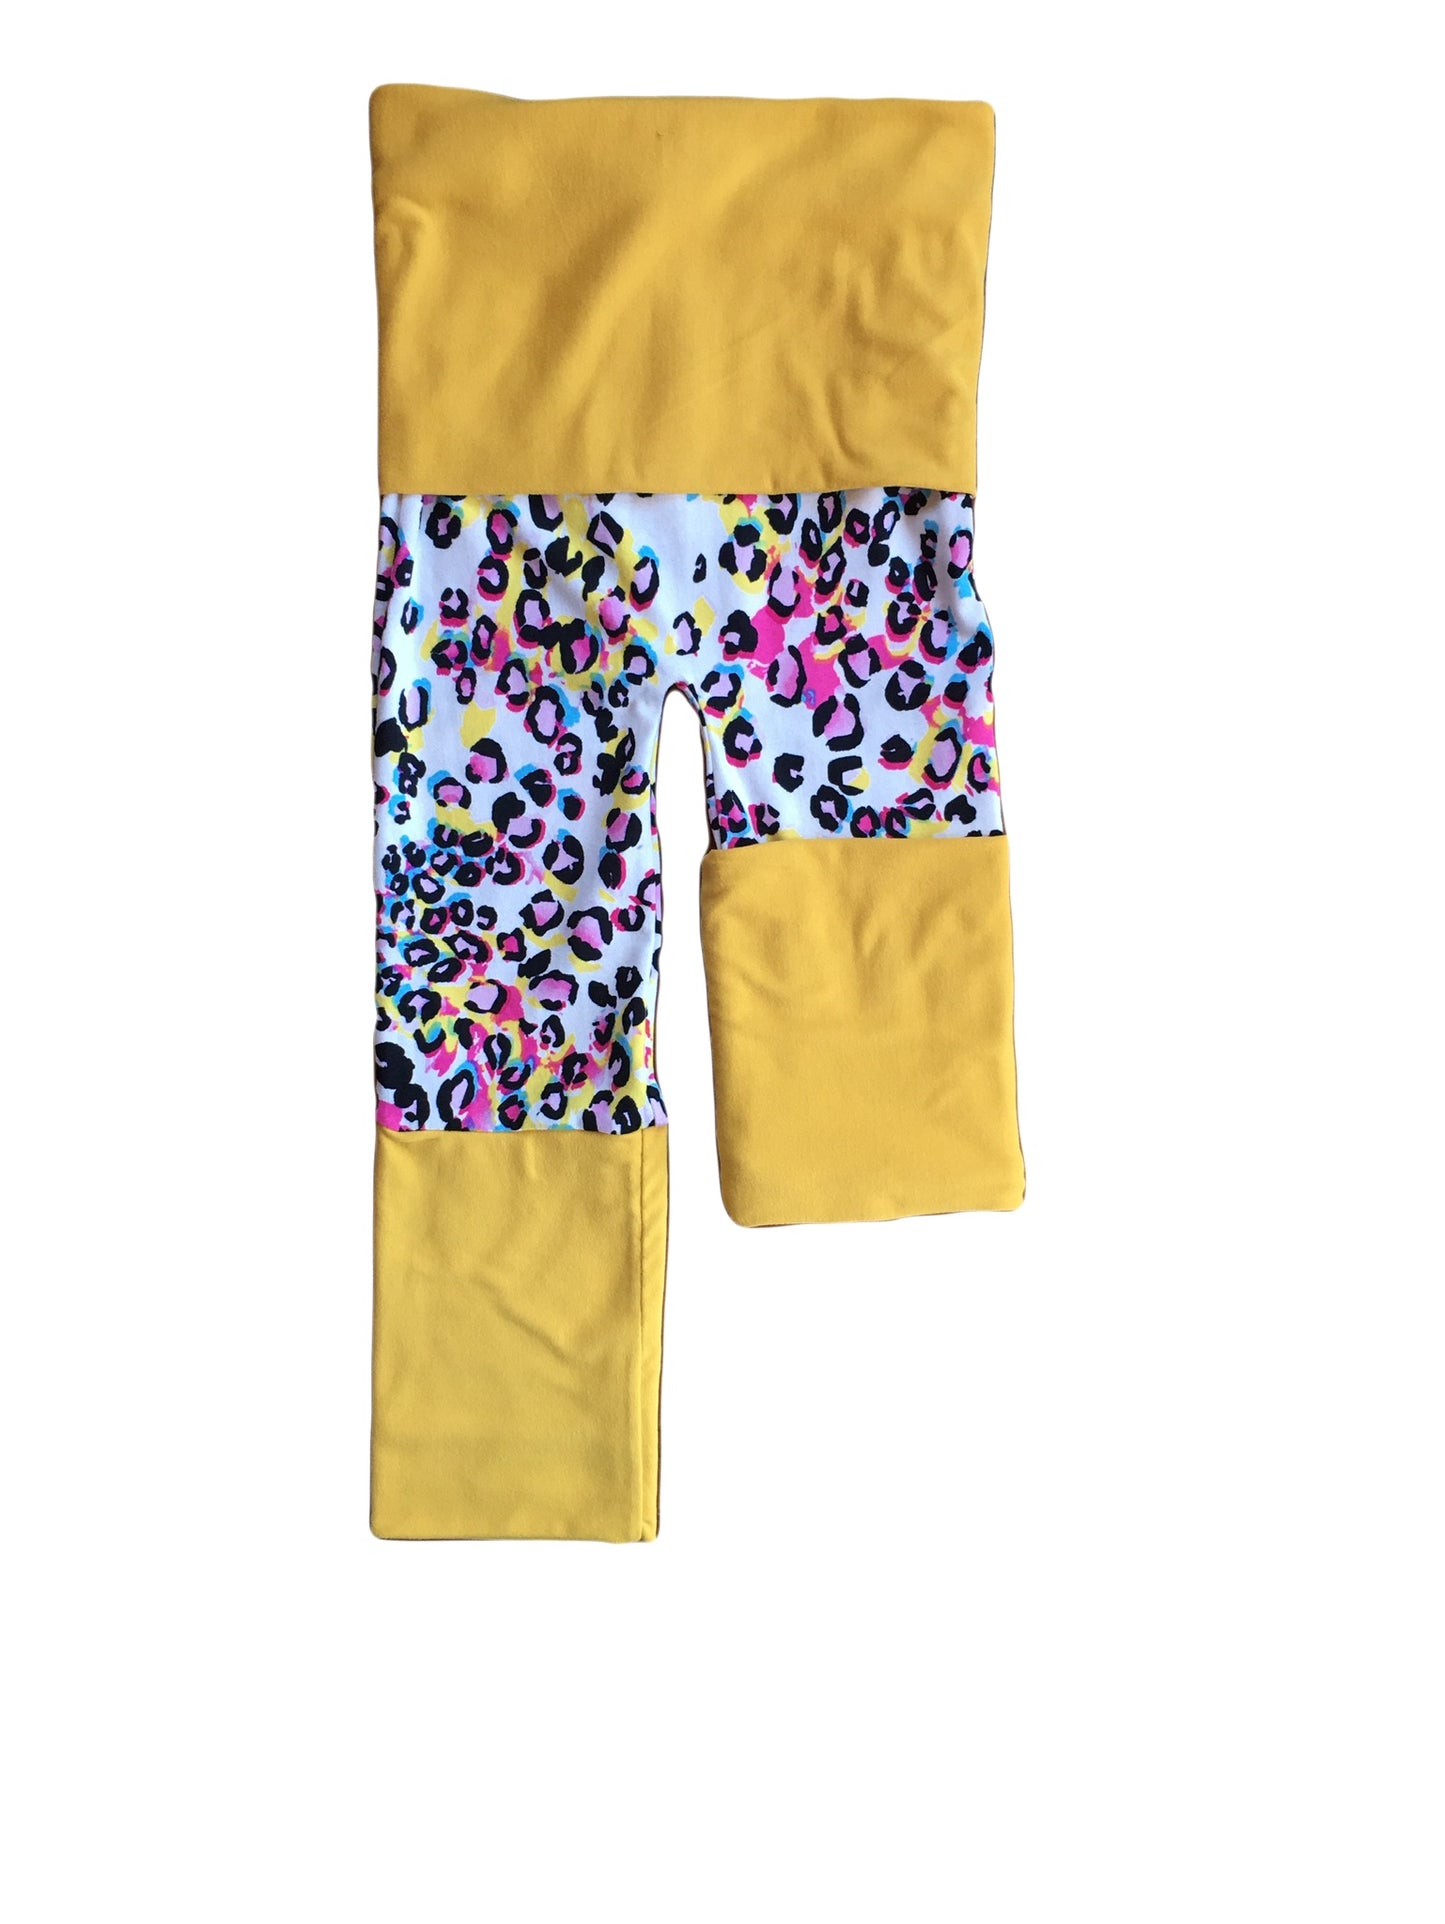 Adjustable Pants - Leopard with Yellow